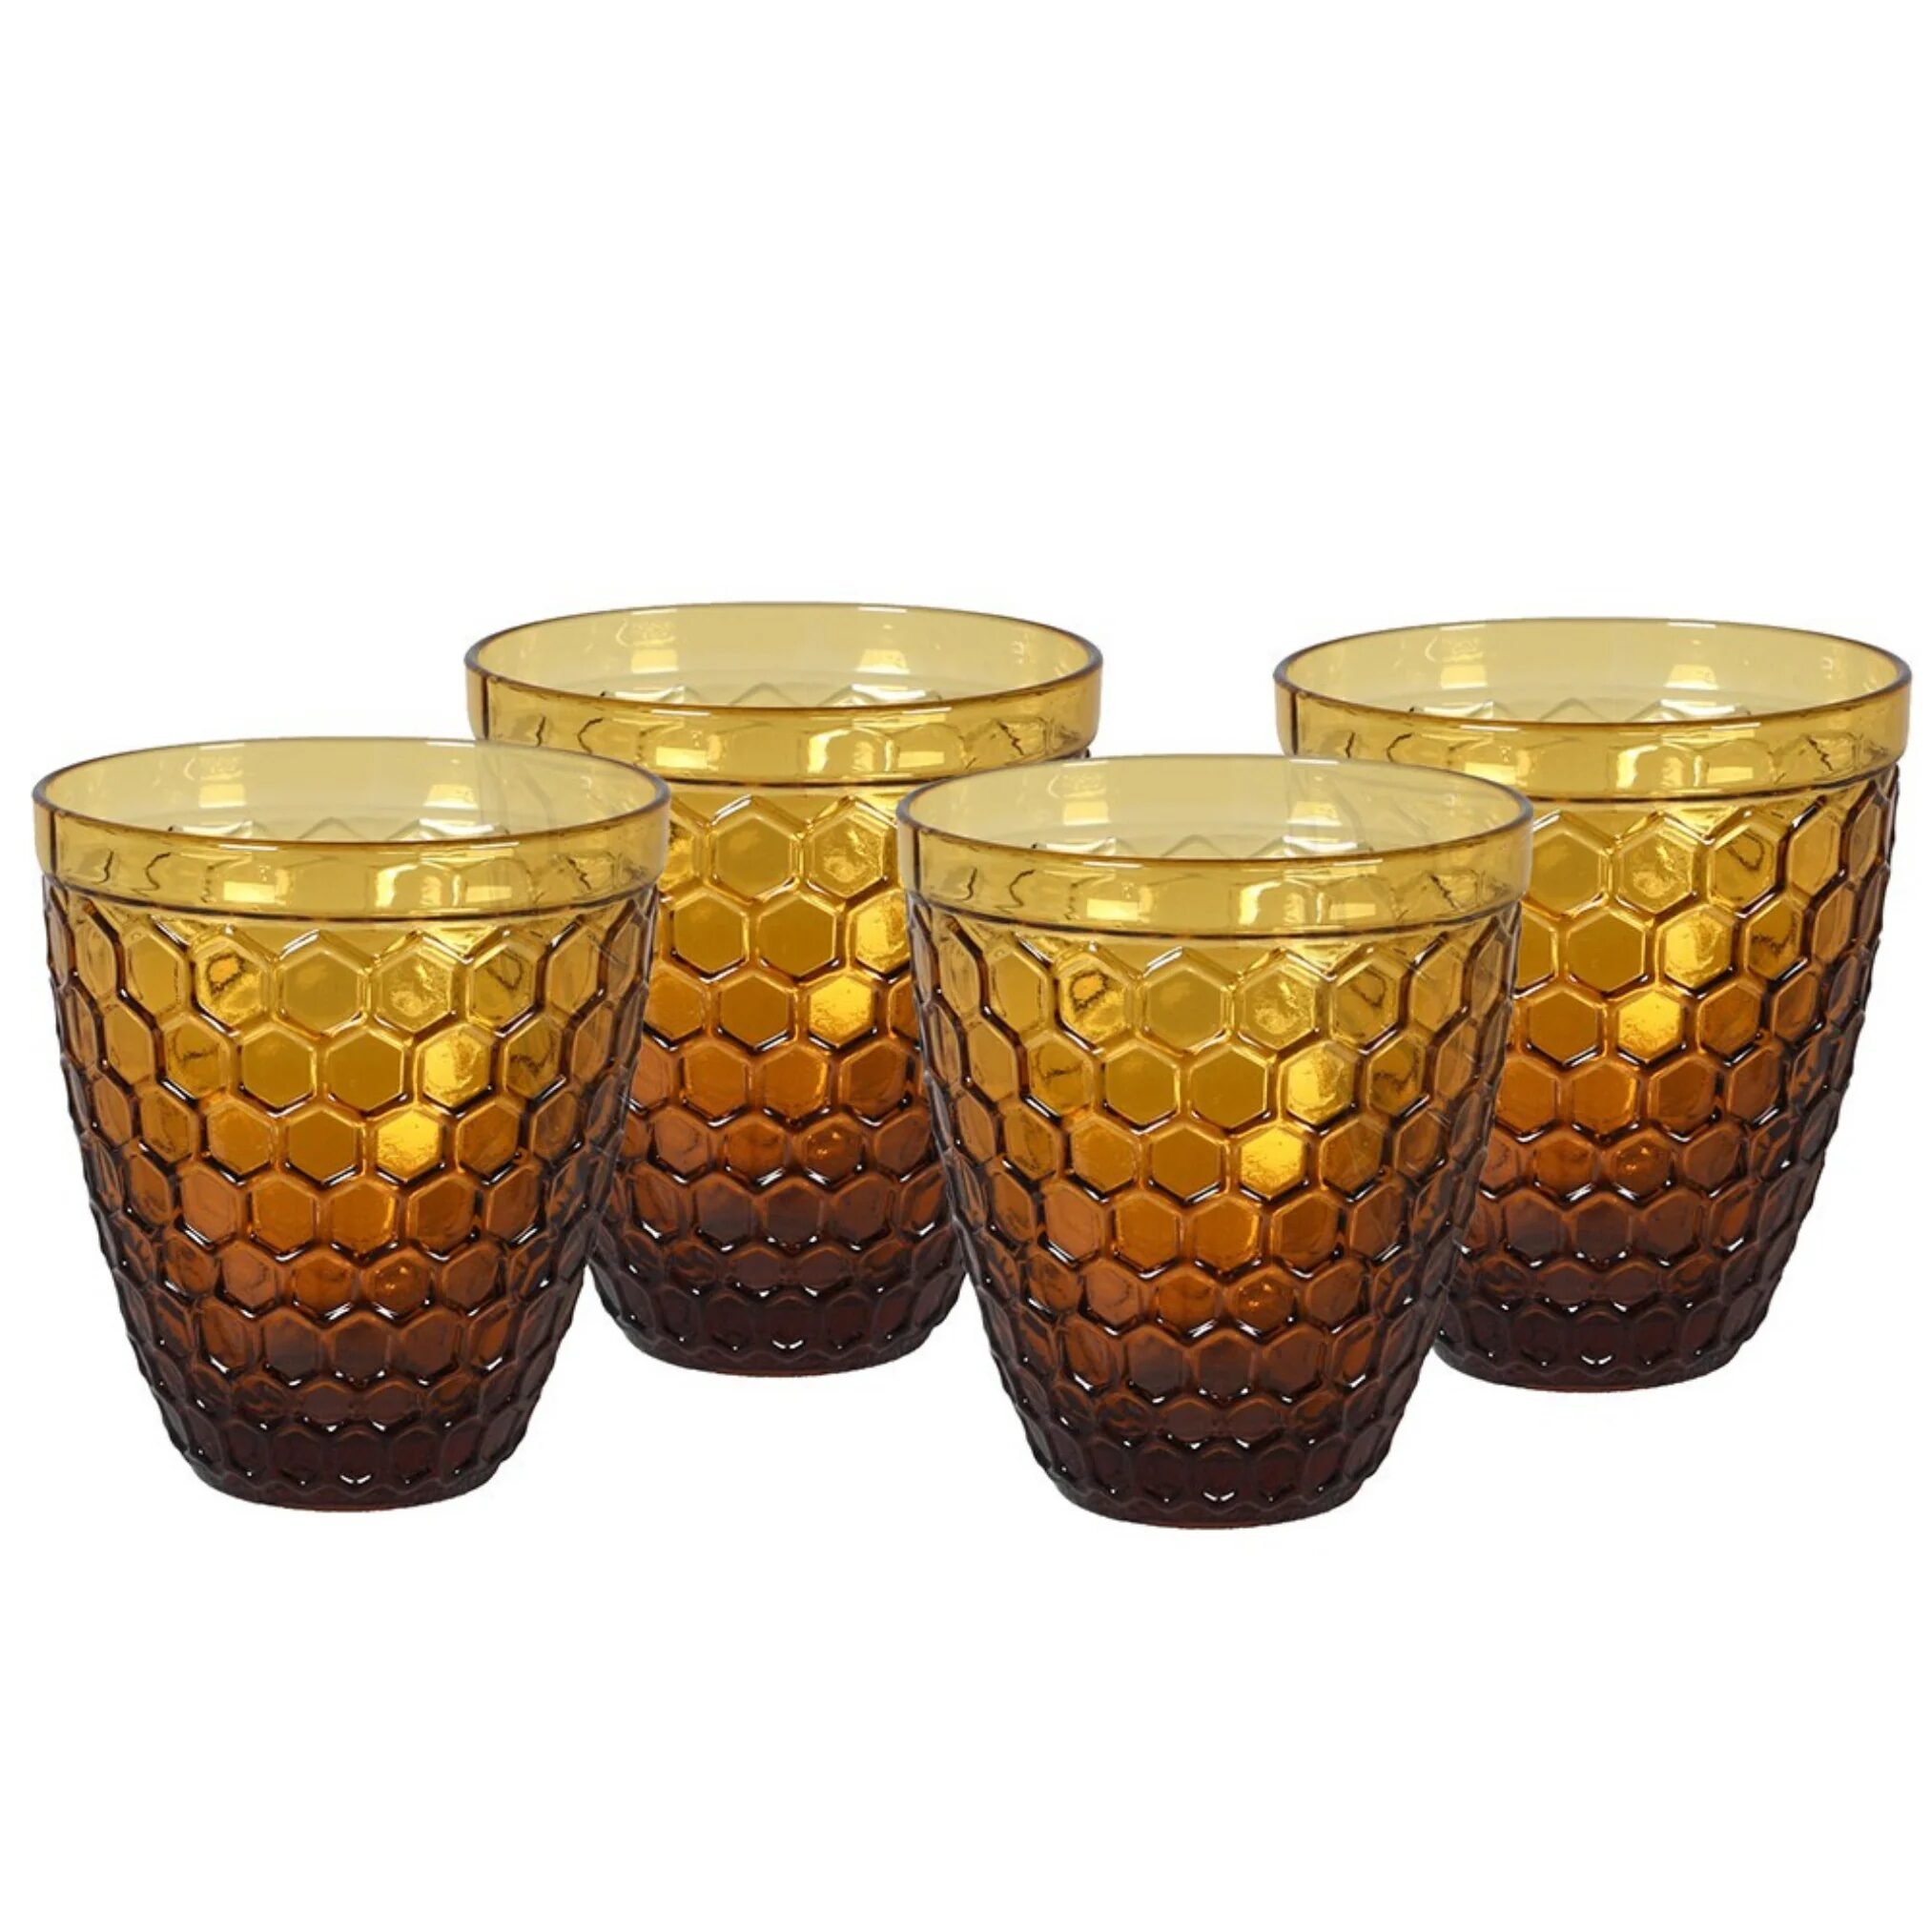 Amber glasses for a dining room to demonstrate boho style home decor